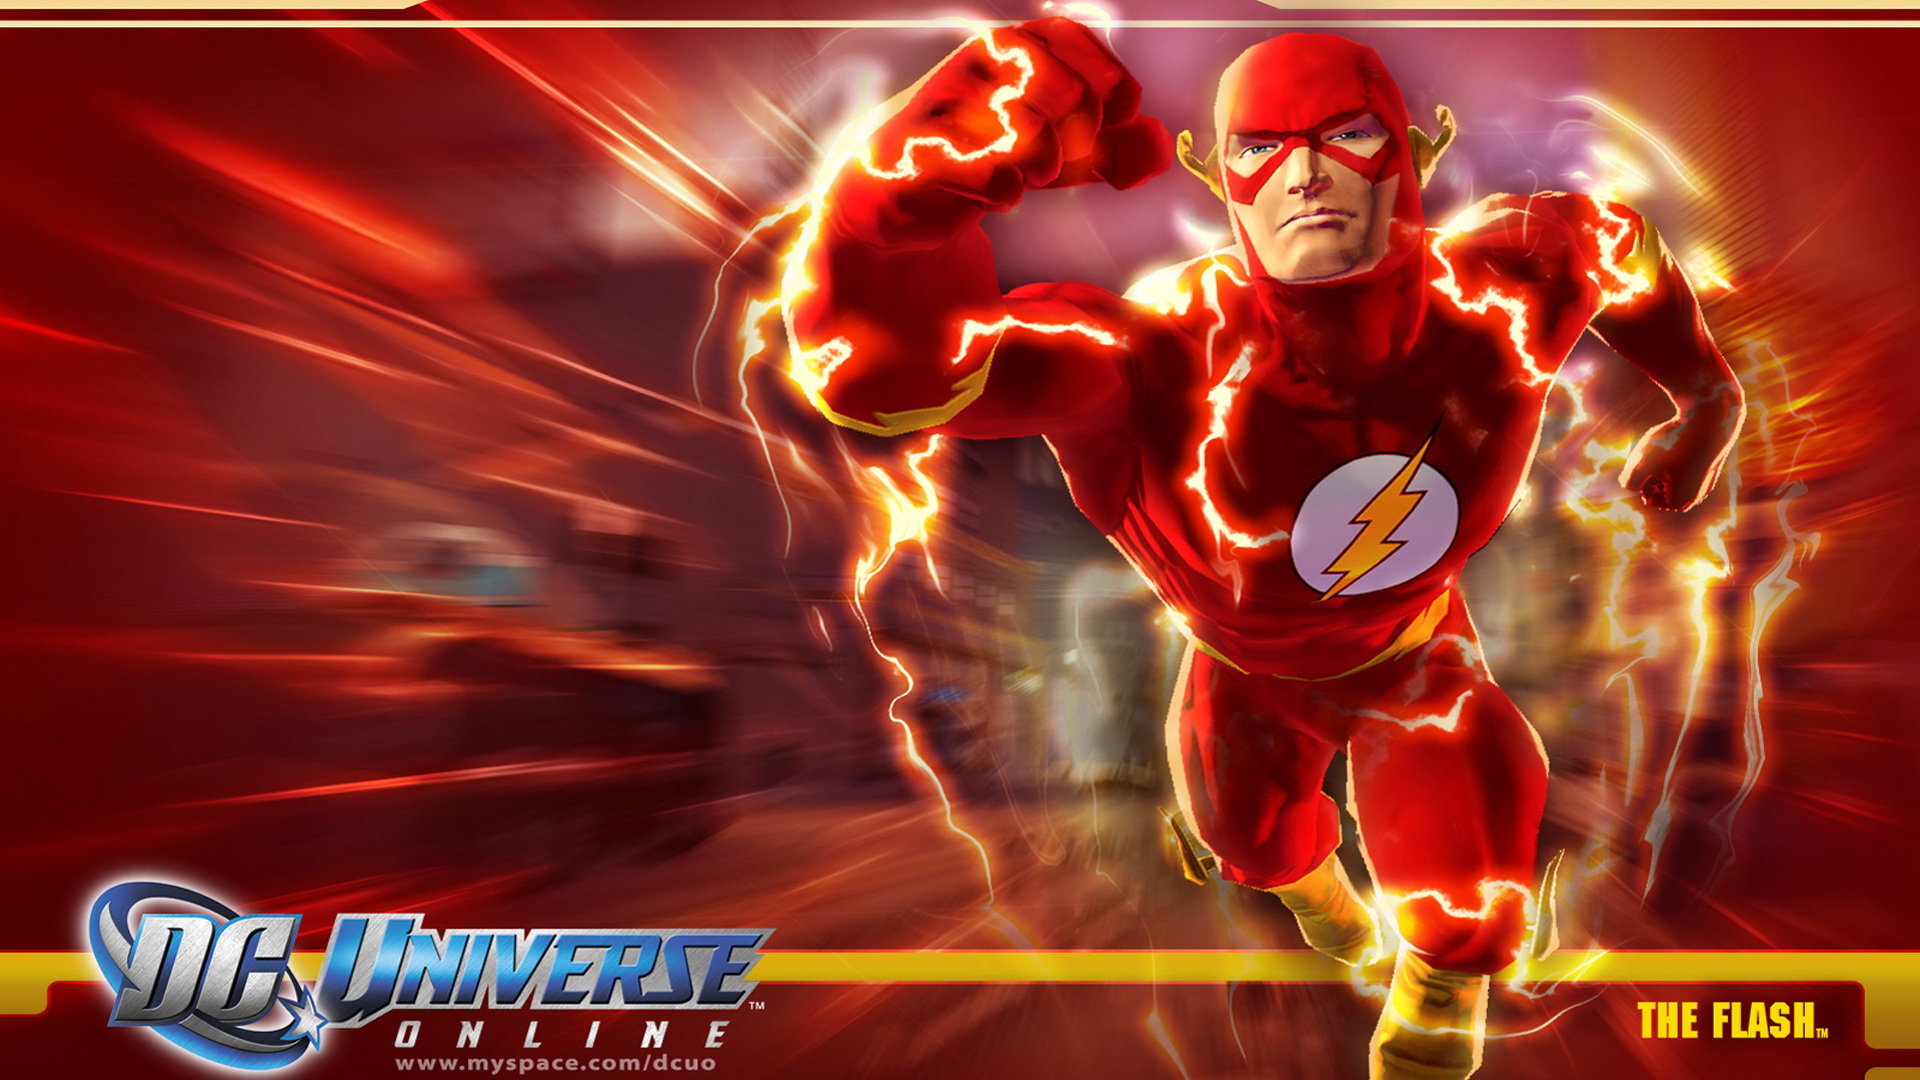 Game Hd Wallpapers Video Games Hd 1080p Wallpaper Dcuo The Flash ...